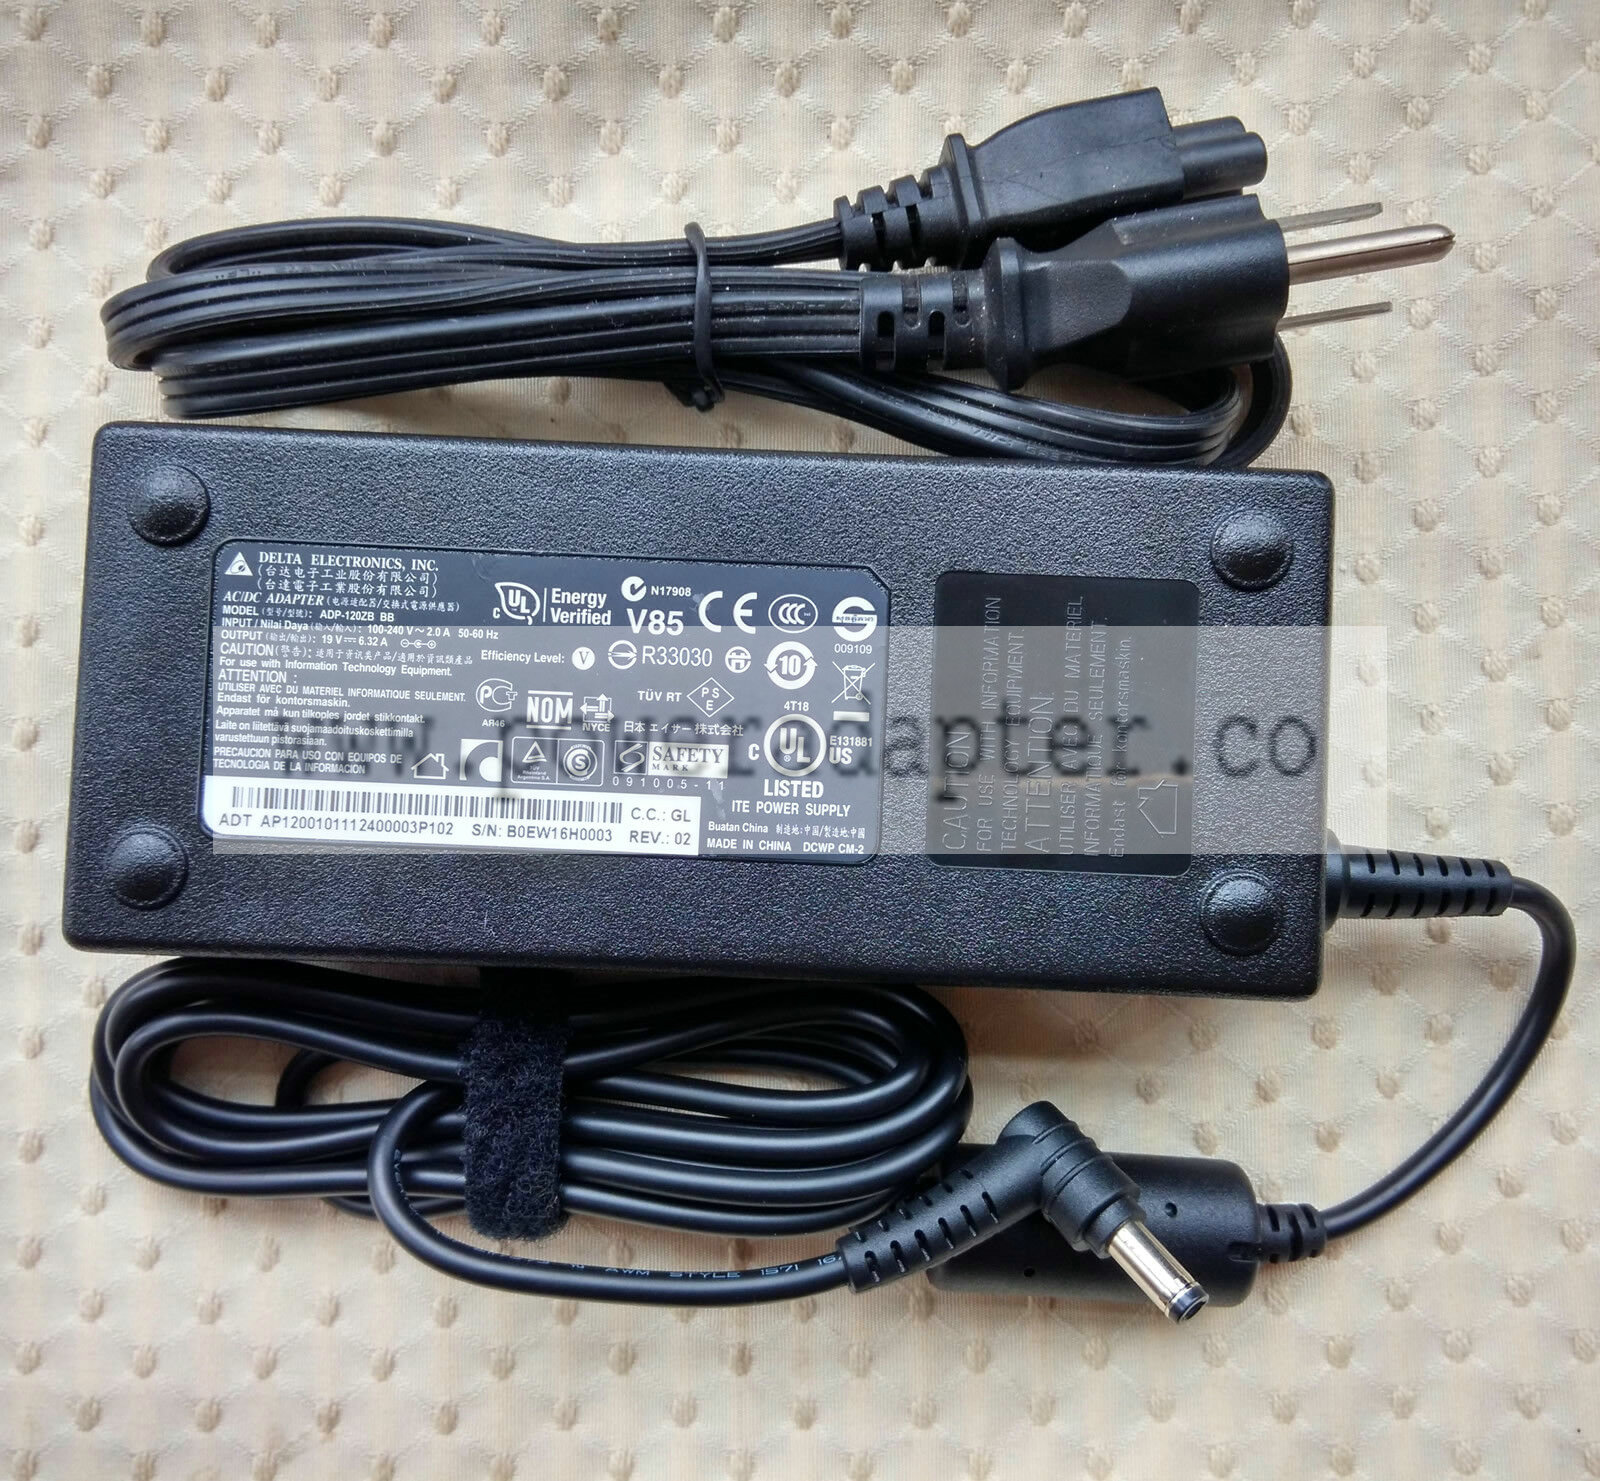 Original OEM AC/DC Adapter for Medion Akoya P8614 MD98310 ADP-120ZB B,FSP120-AAC Output Current: 6.32A Compatible Pro